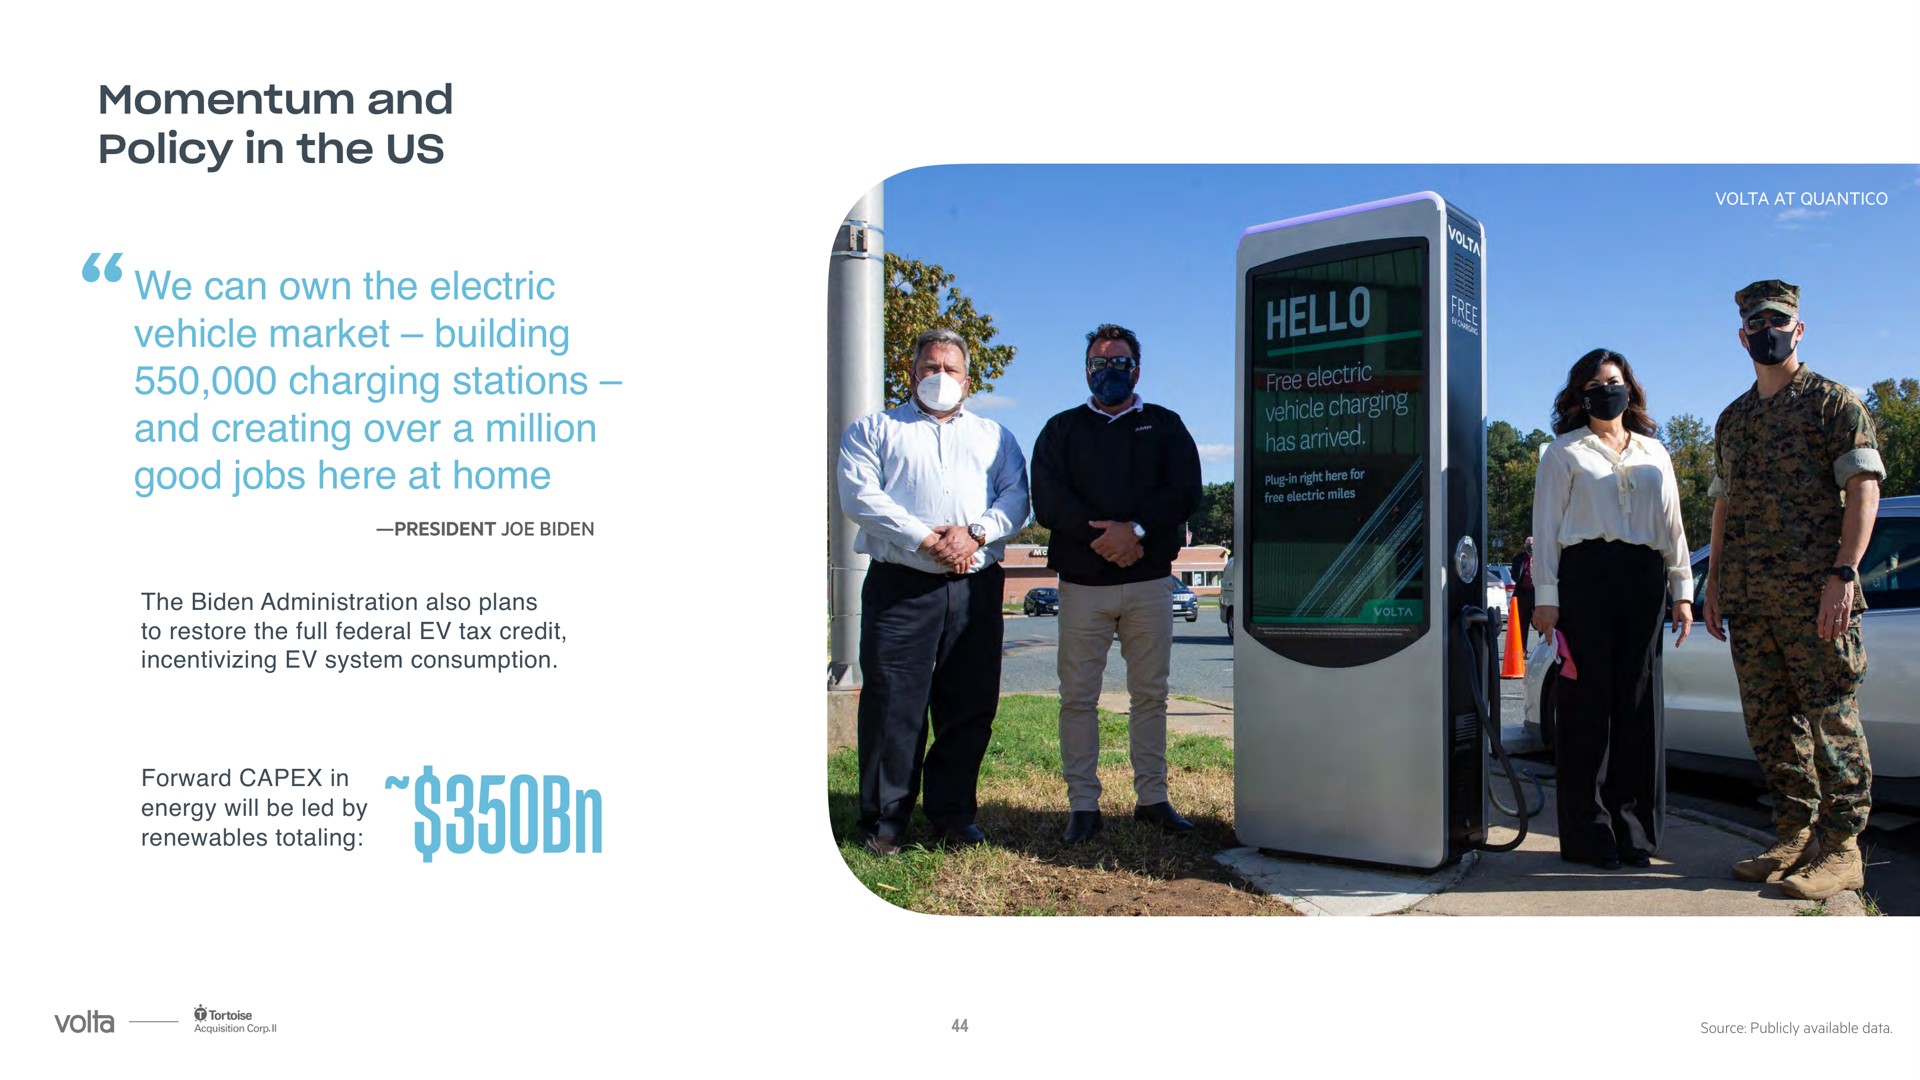 momentum and policy in the us we can own the electric vehicle market building charging stations and creating over a million good jobs here at home | Volta